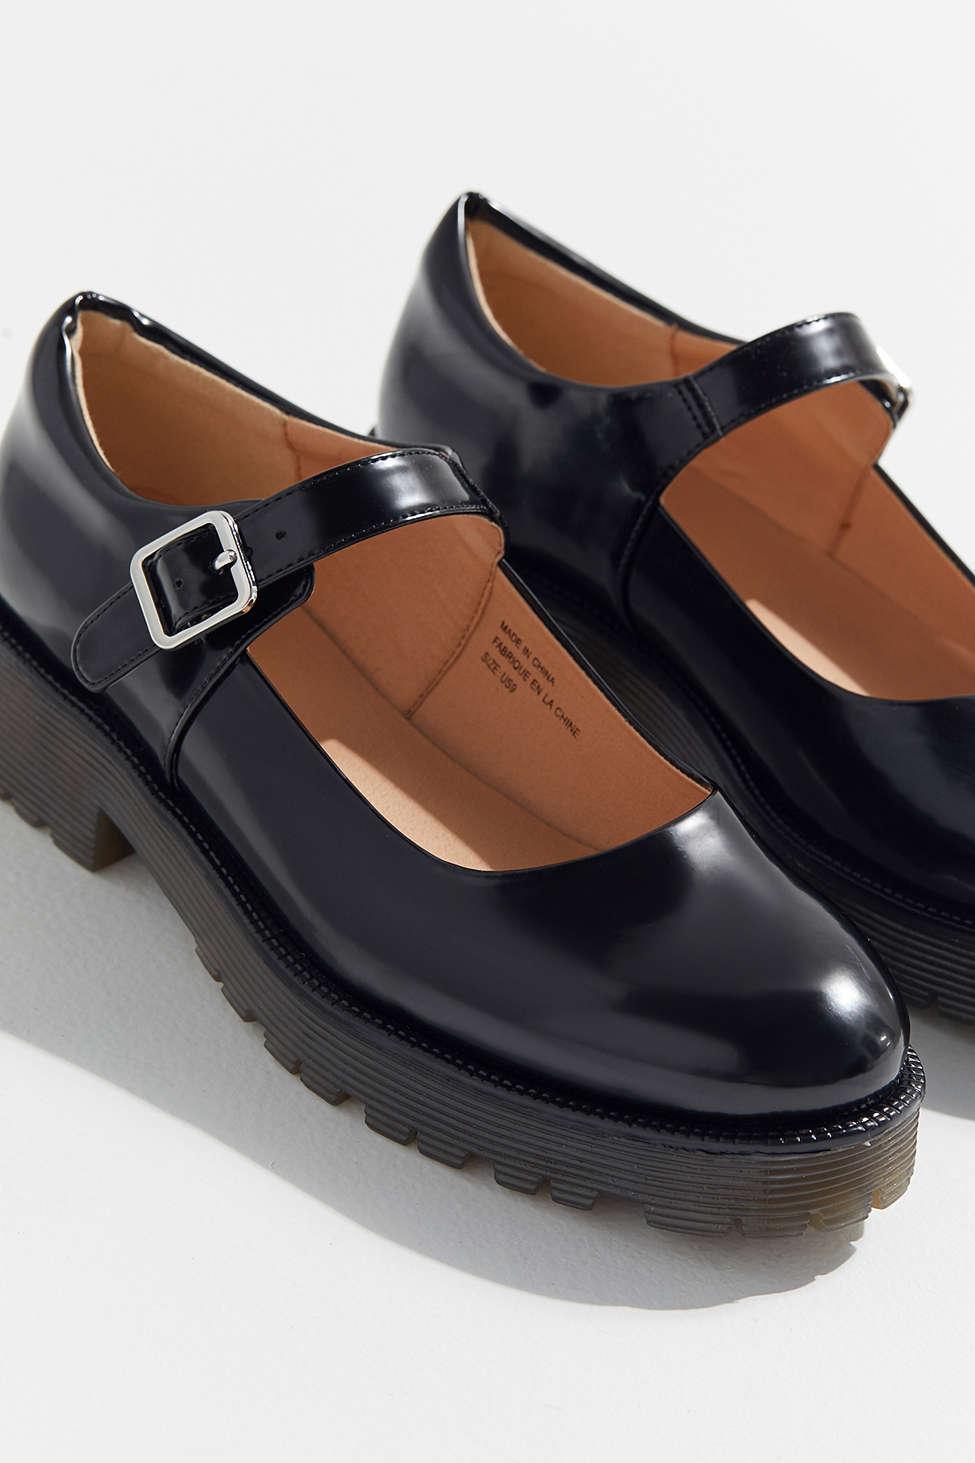 Urban Outfitters Greta Mary Jane Oxford in Black - Lyst